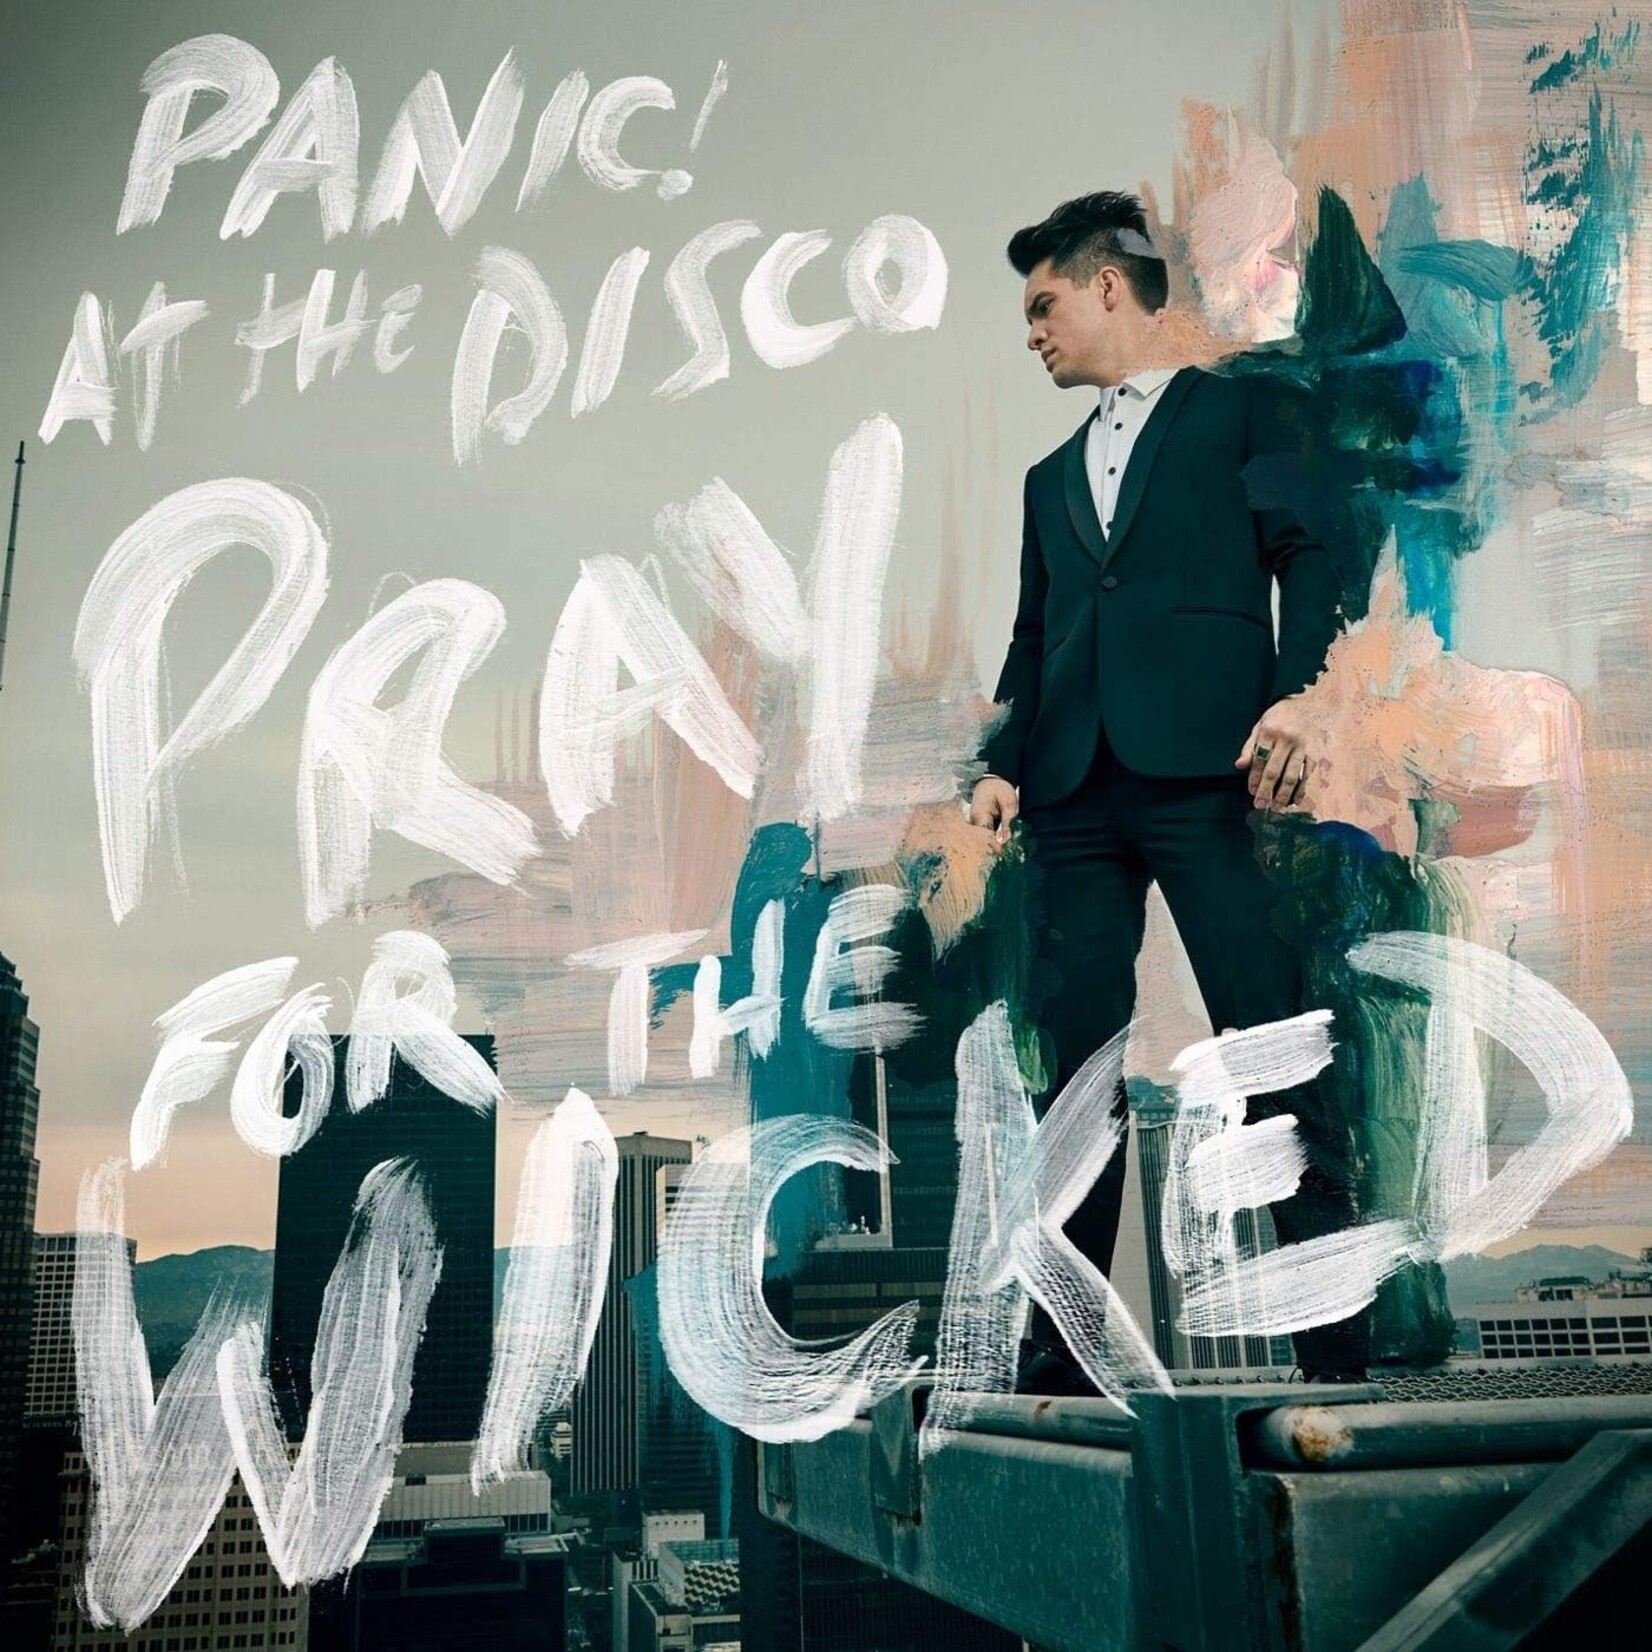 Panic! At The Disco - Pray for the Wicked (nm) near mint